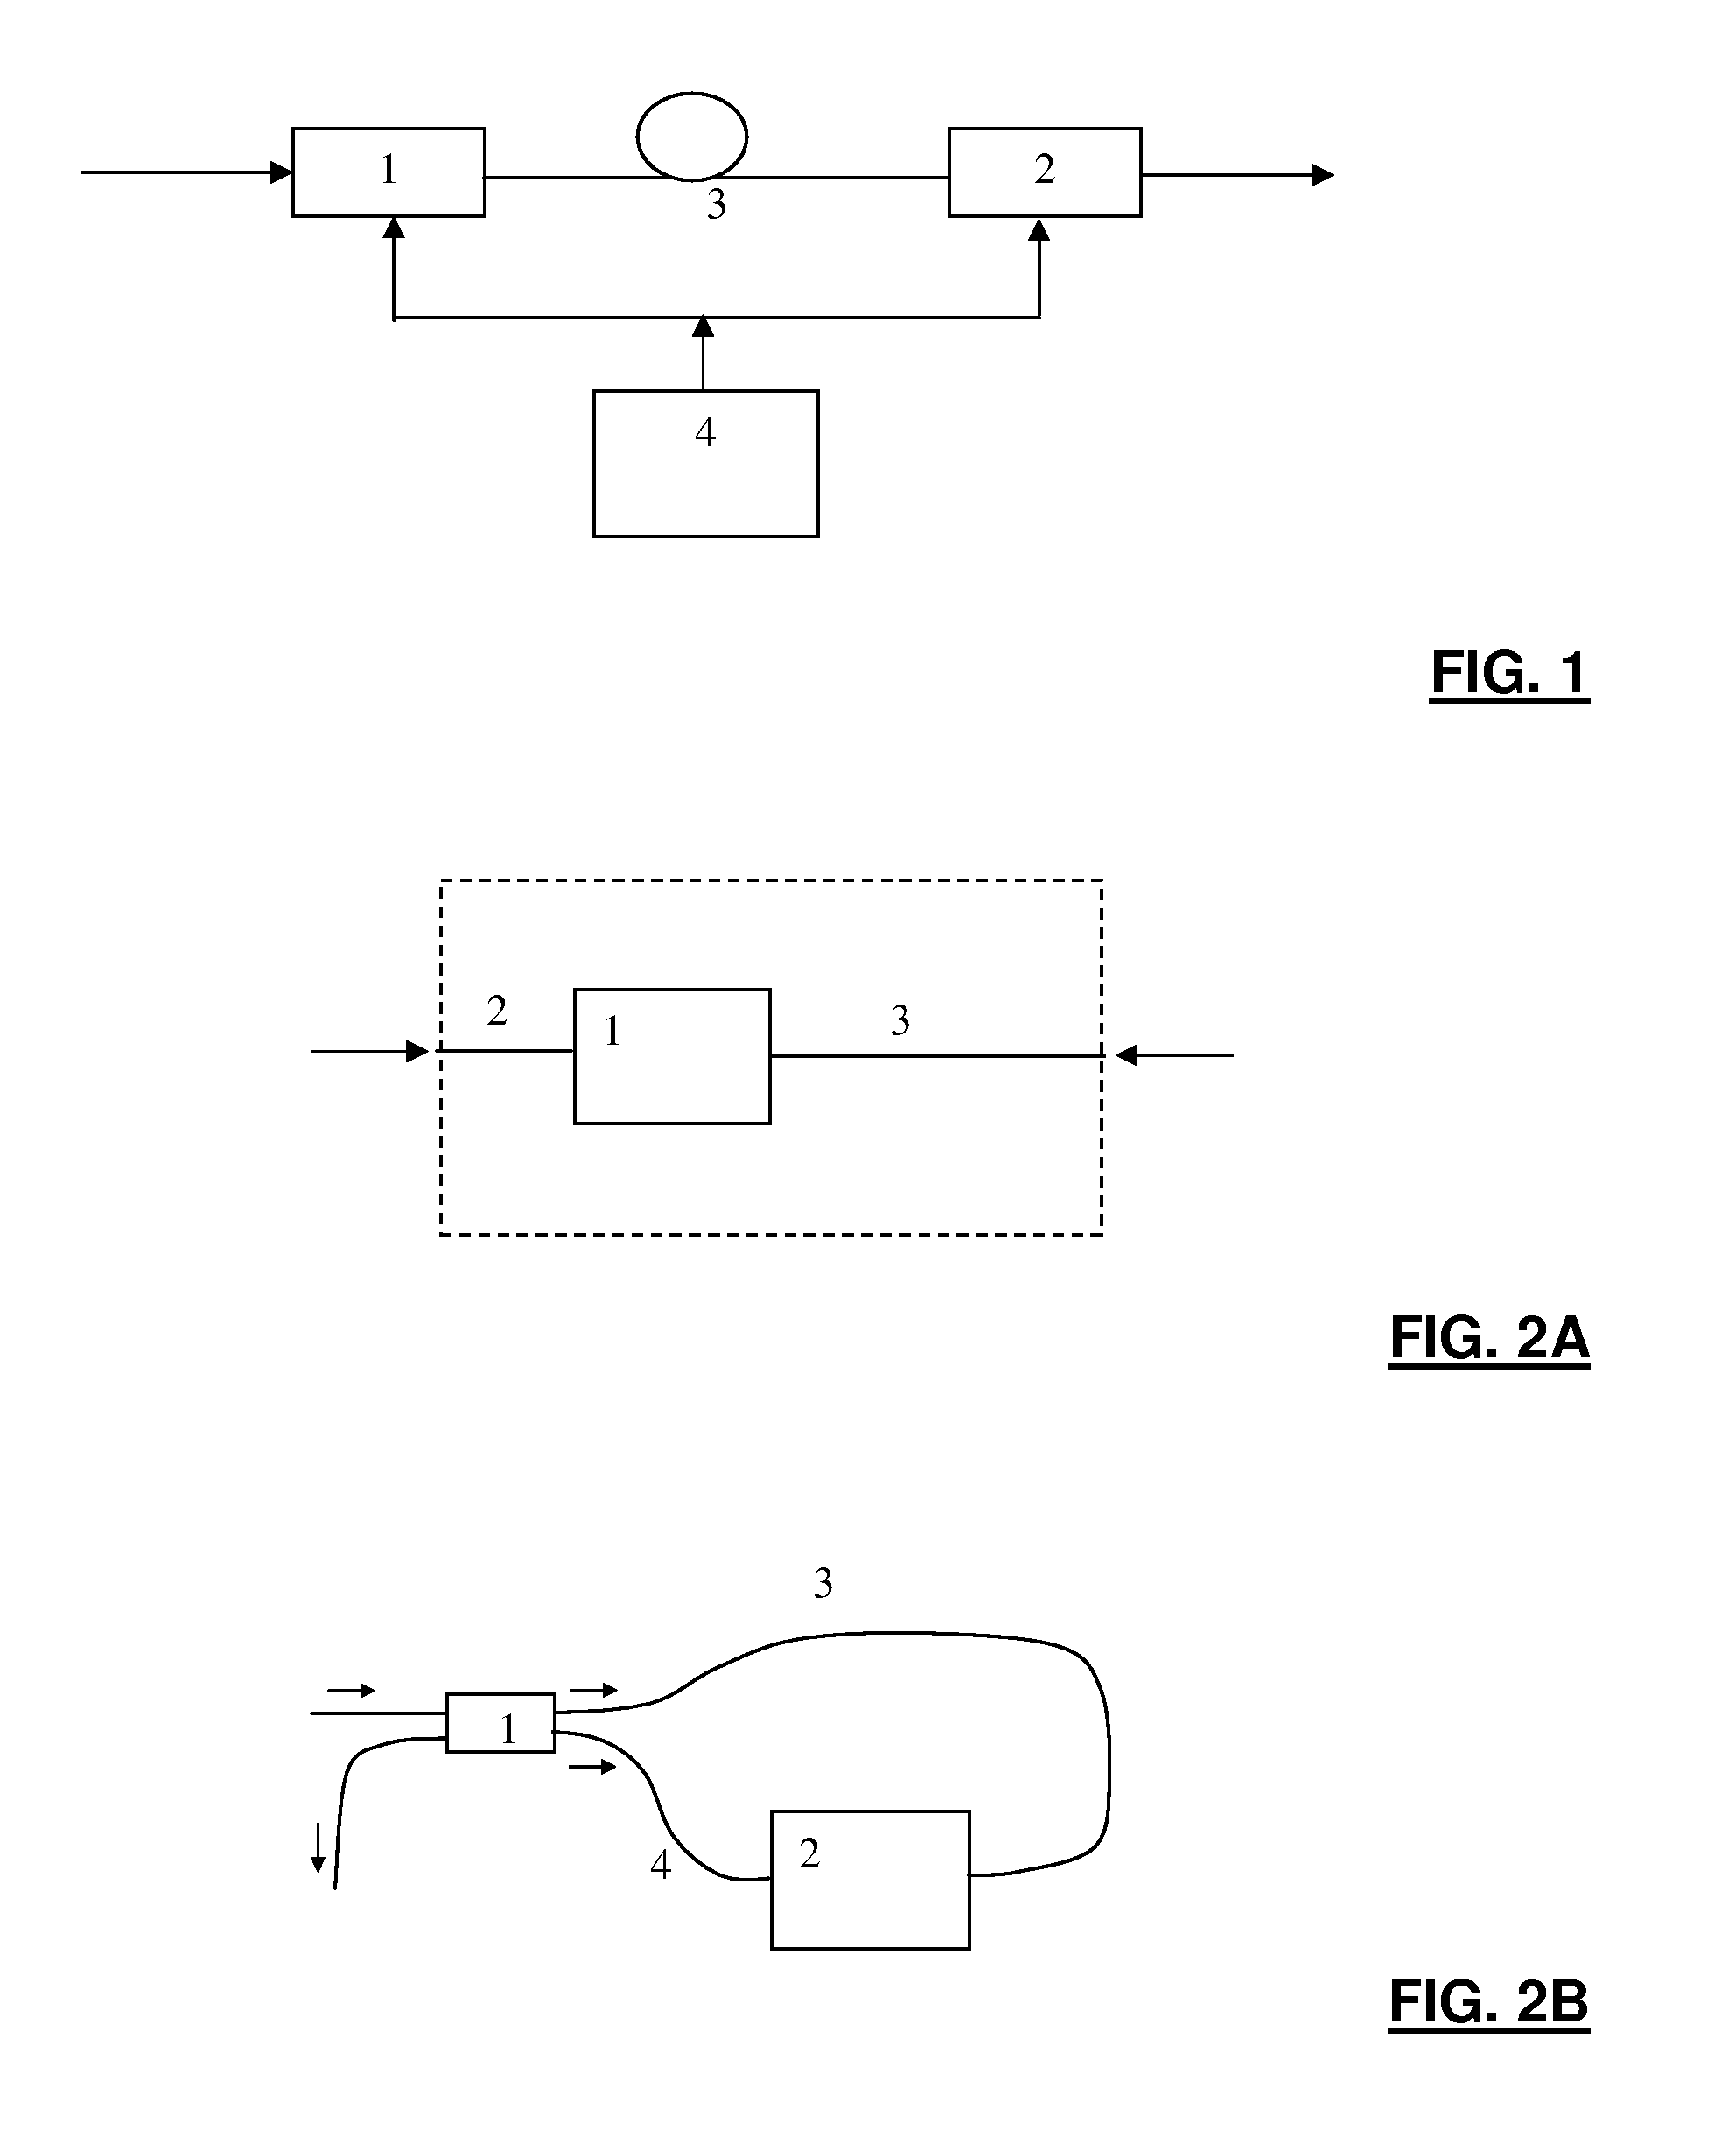 Method, system and apparatus for optical phase modulation based on frequency shift